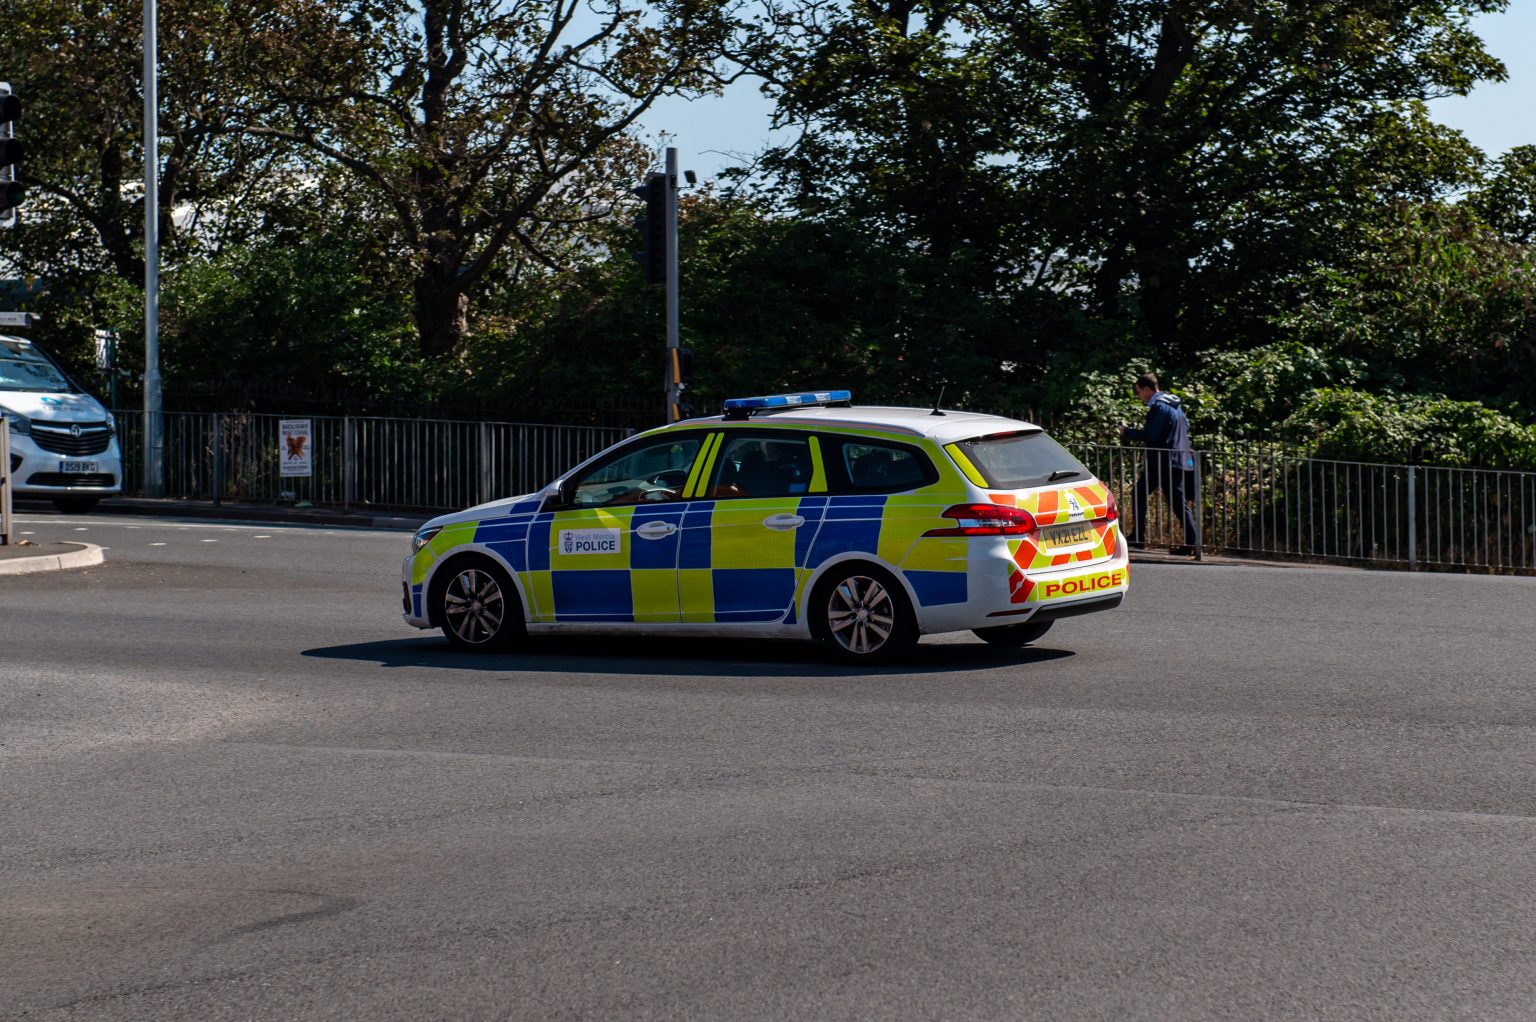 NEWS | Firearms officers arrest one man after stopping vehicle in Worcester